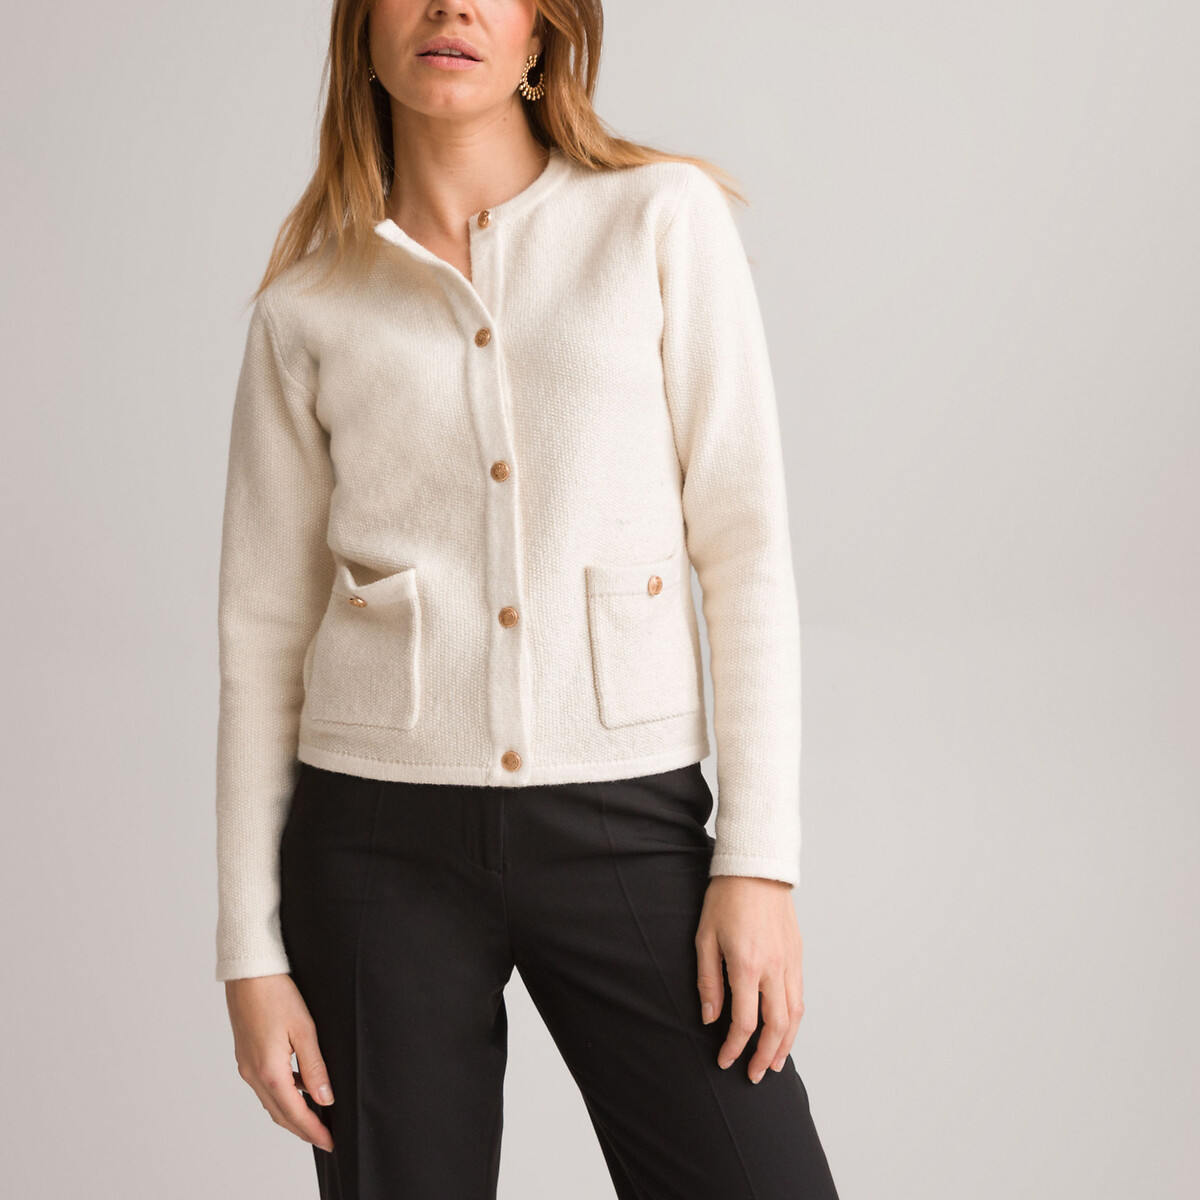 Chunky knit buttoned cardigan, ivory, Anne Weyburn | La Redoute